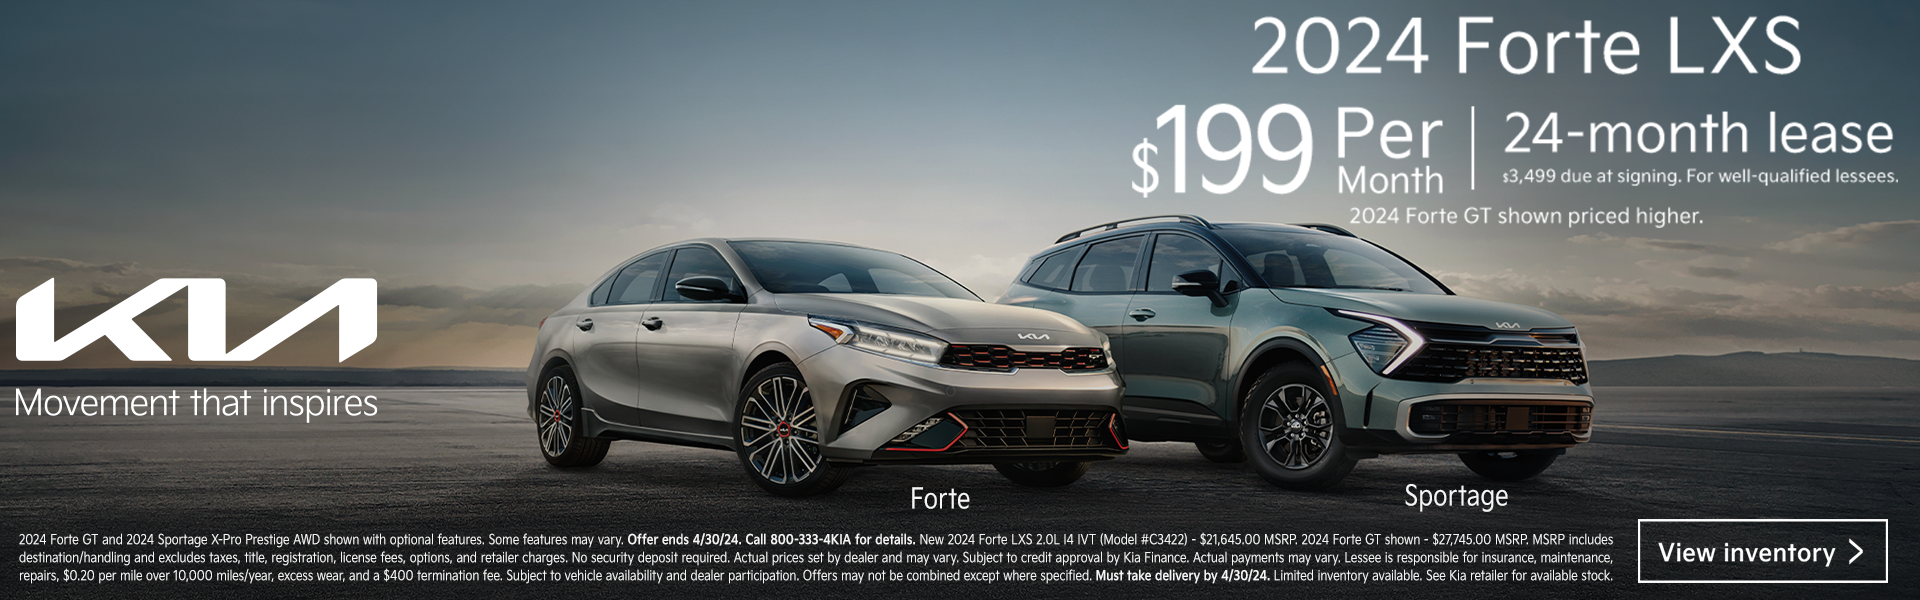 2024 Forte LXS $199